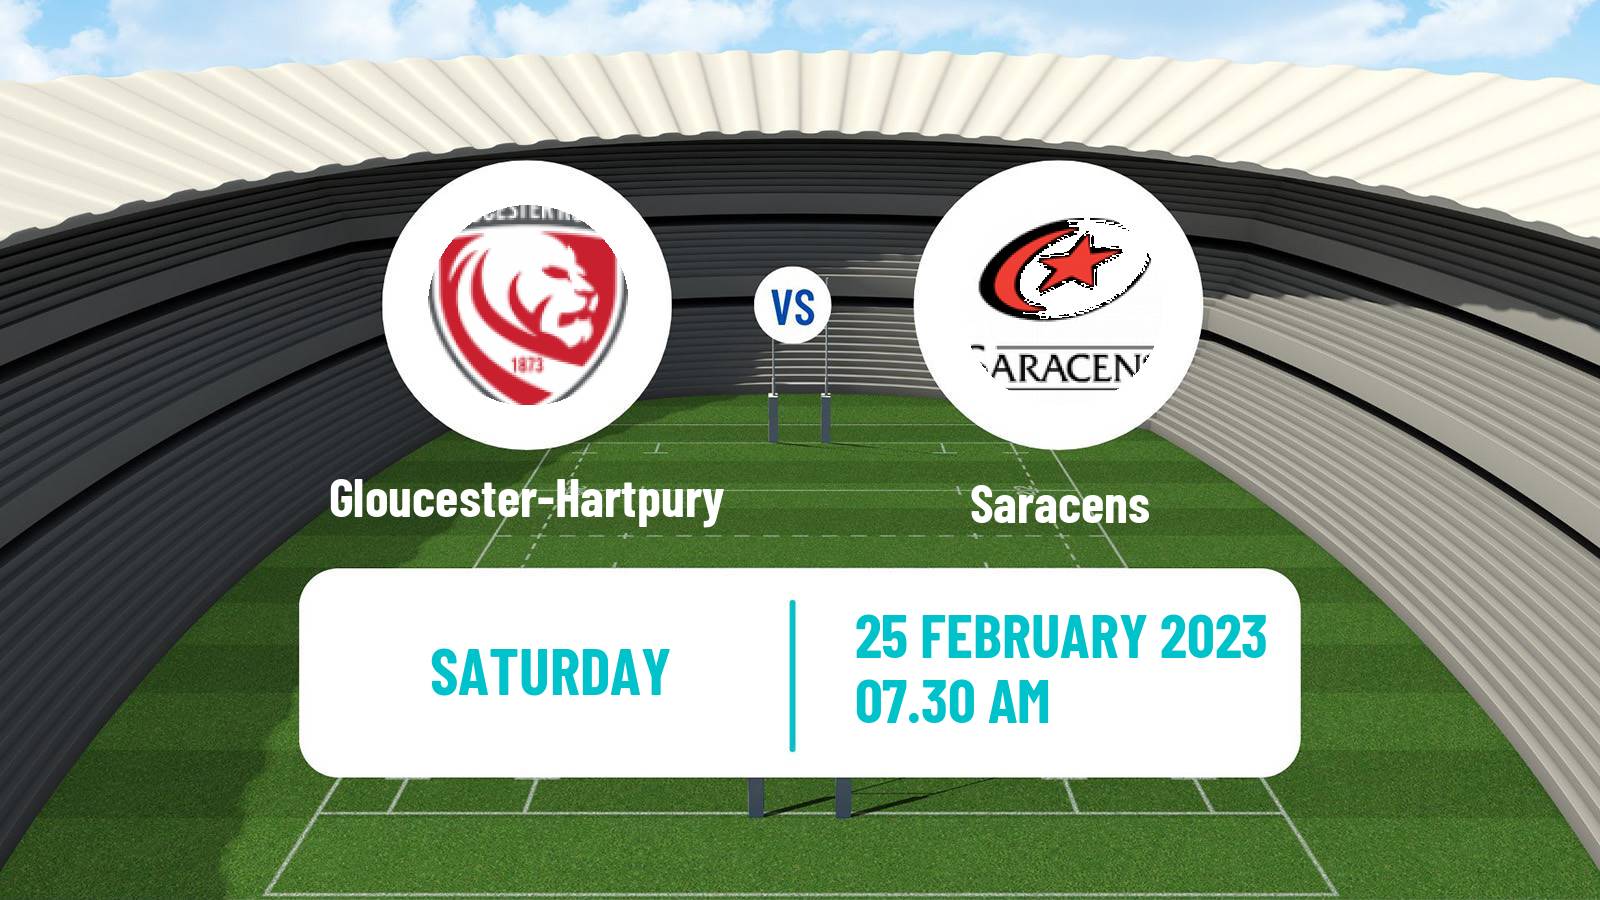 Rugby union English Premier 15s Rugby Women Gloucester-Hartpury - Saracens